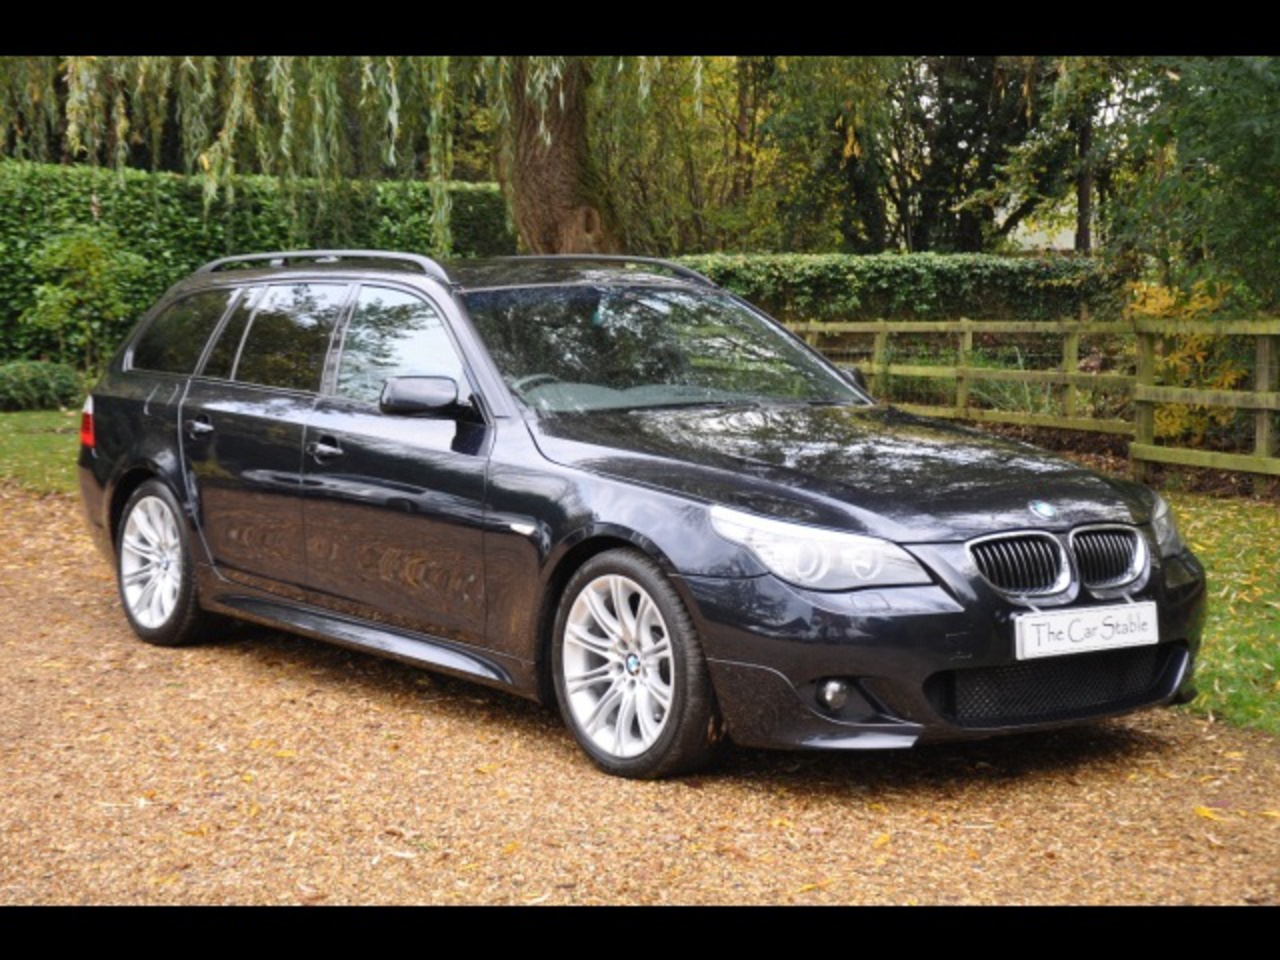 View Download Wallpaper. 751x501. Comments. BMW 530dM Touring